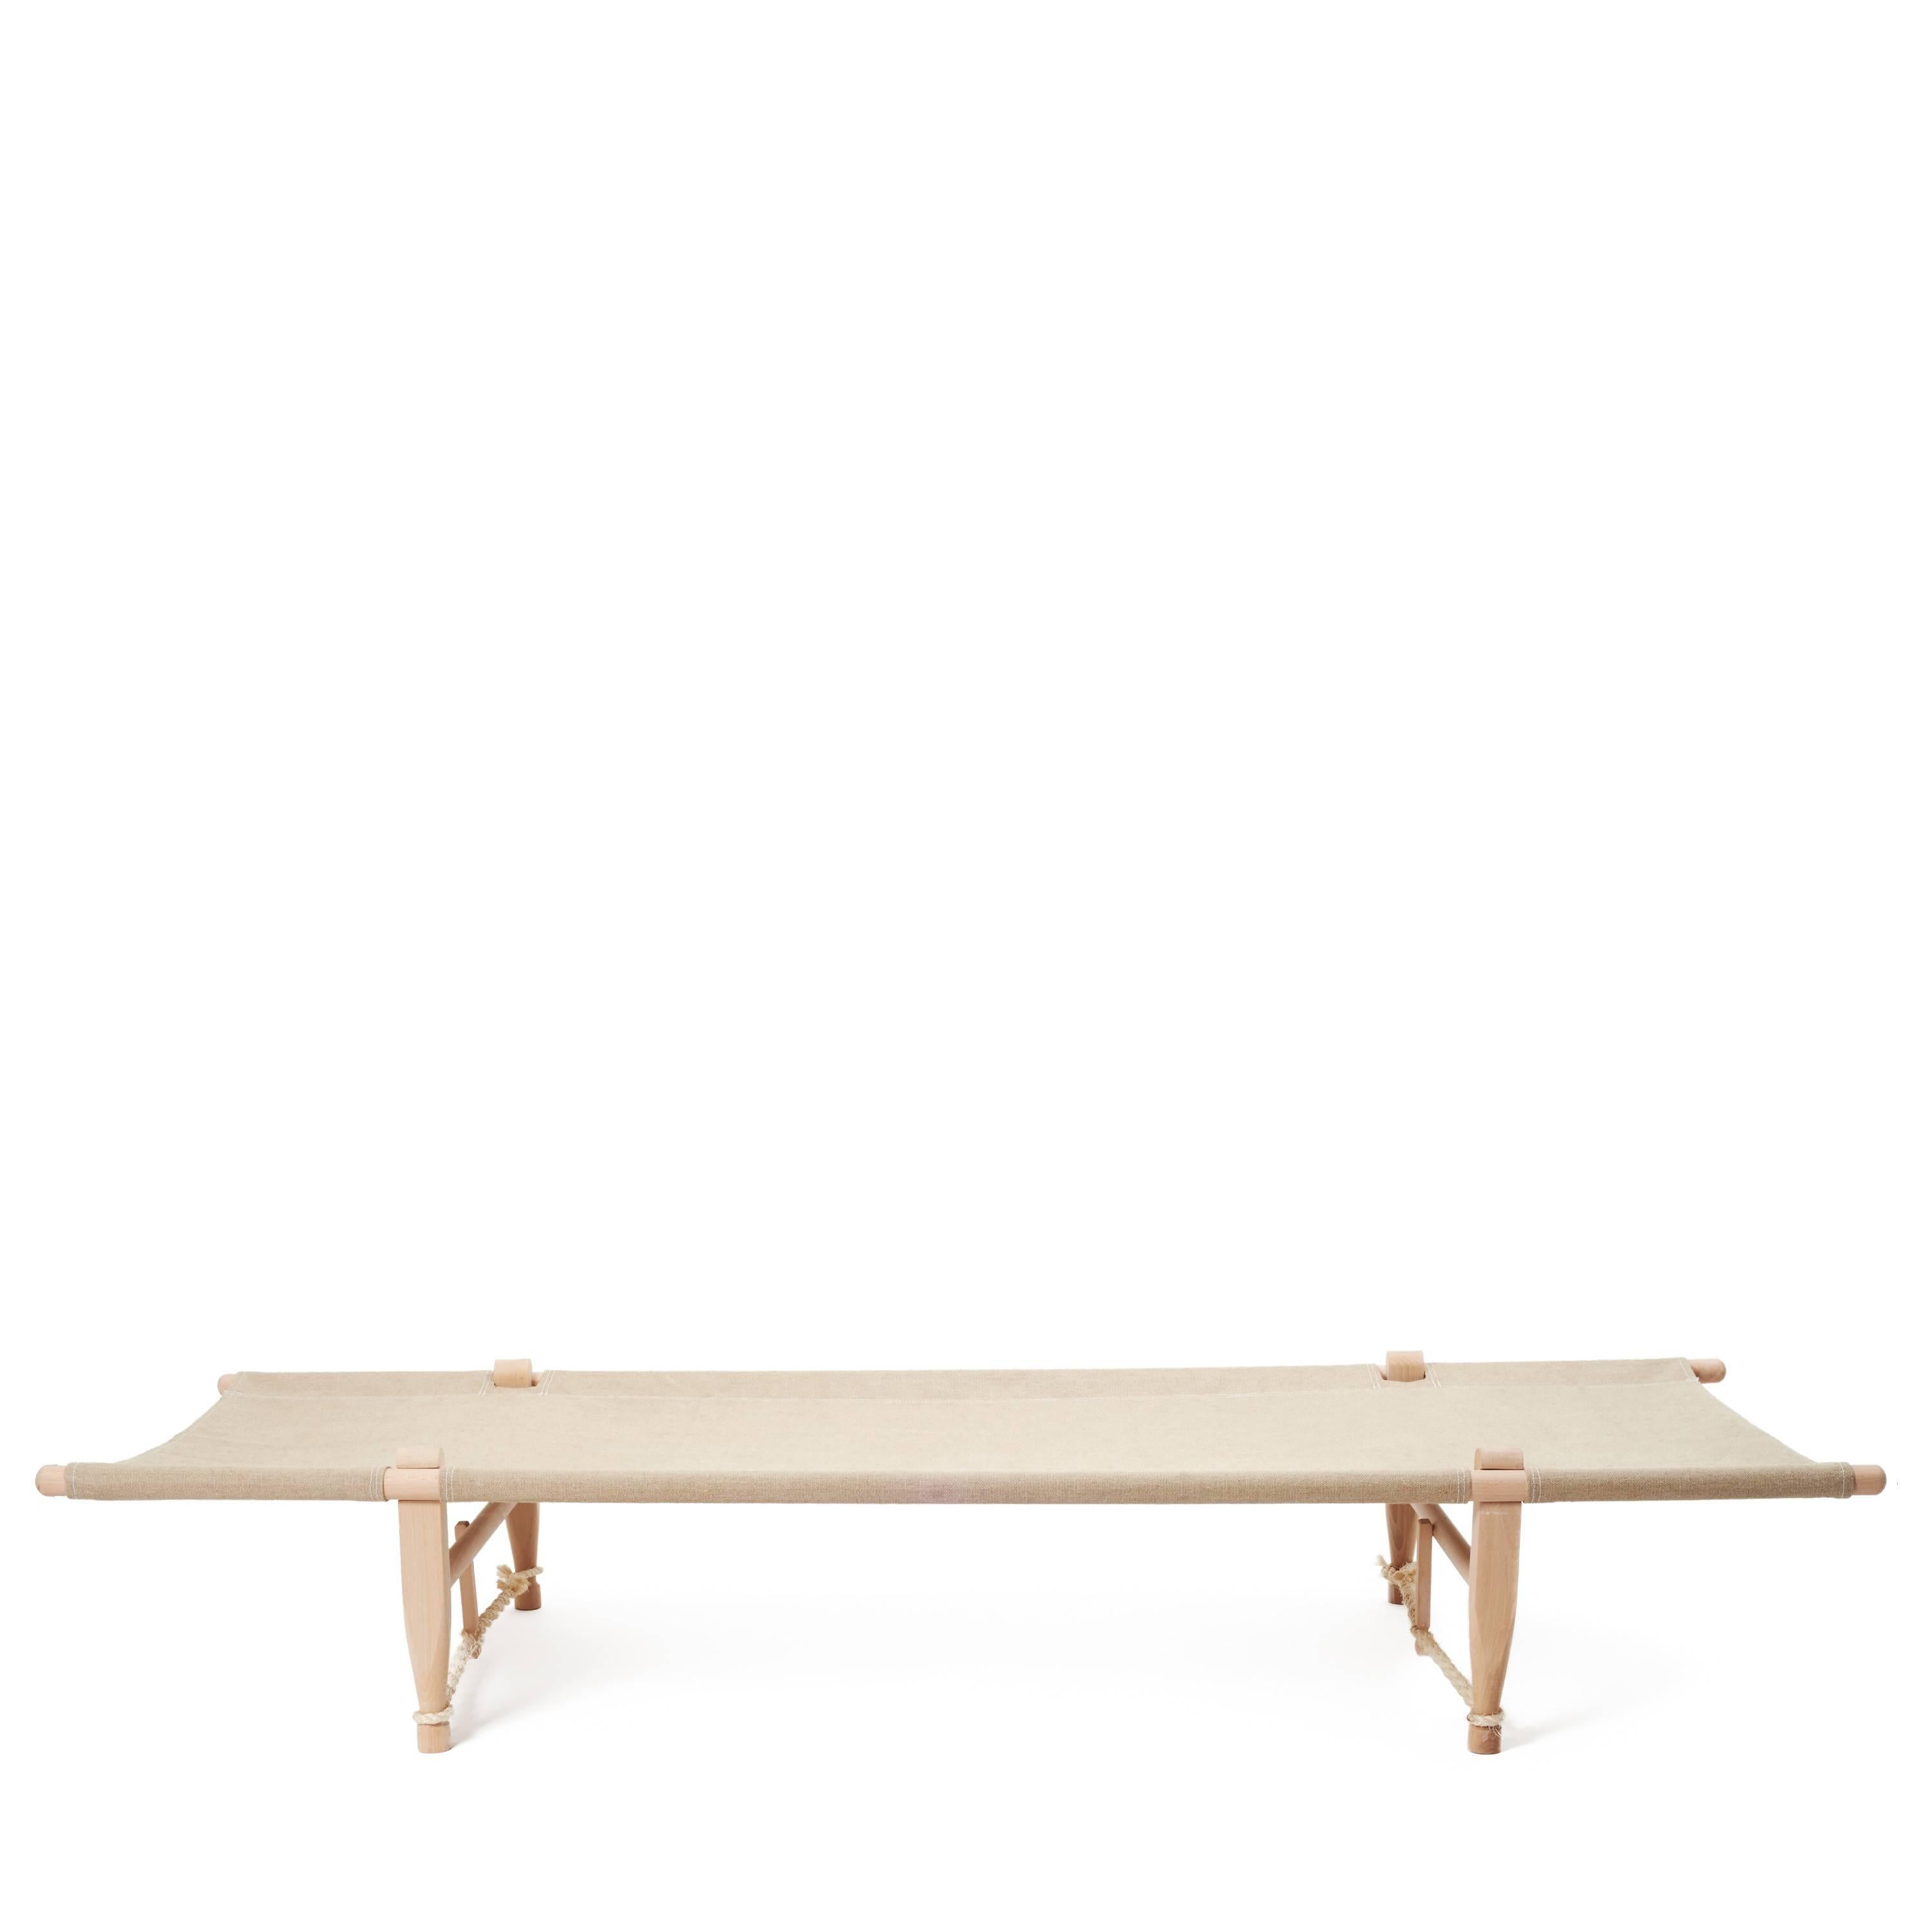 Designed in 1962 by Ole Gjerløv-Knudsen, this OGK natural safari daybed is portable, light, comfortable, and fully functions as a coffee table by day and a place of rest at night. Made of untreated beech wood, uncolored, natural linen cover and